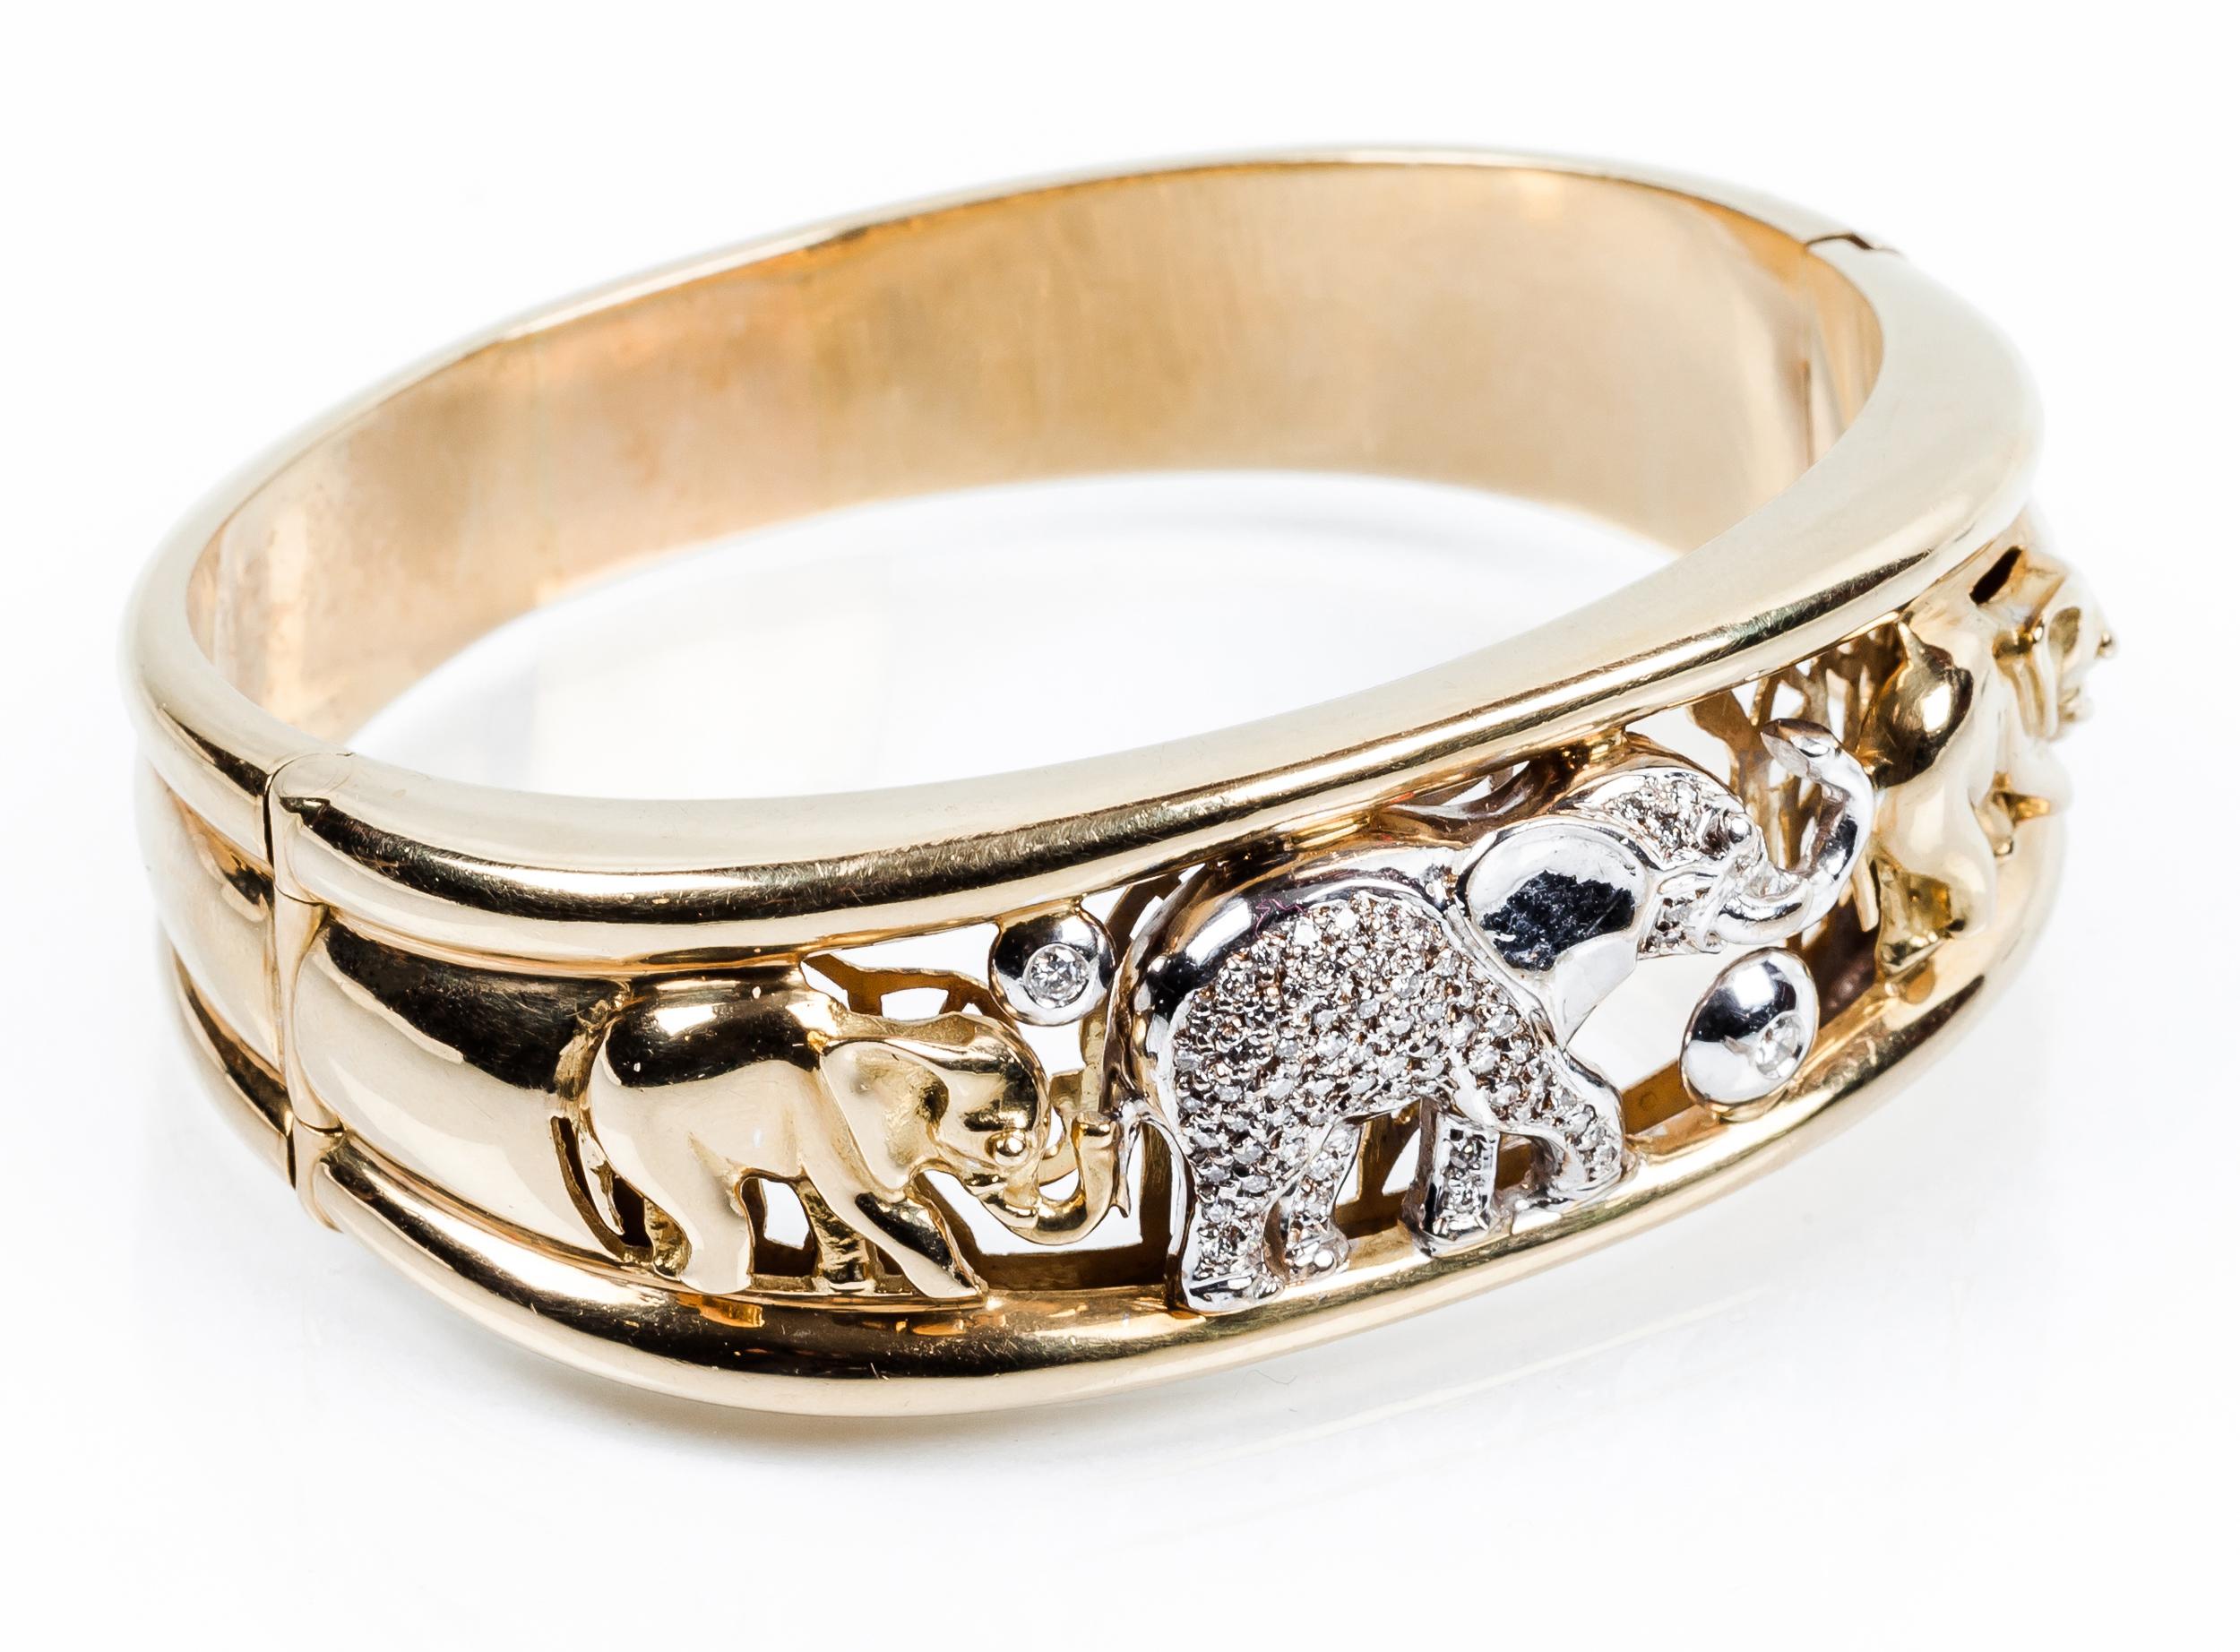 Clampler 18k gold three elephants with  pavé of diamonds bracelet 
2 diamonds total 0.08ct
58 diamonds total 52ct 
color H- clarity VS
Measure  60mm / 2.36in.
Weight 67,5gr.

READY TO SHIP
*Shipment of this piece is not affected by COVID-19. Orders